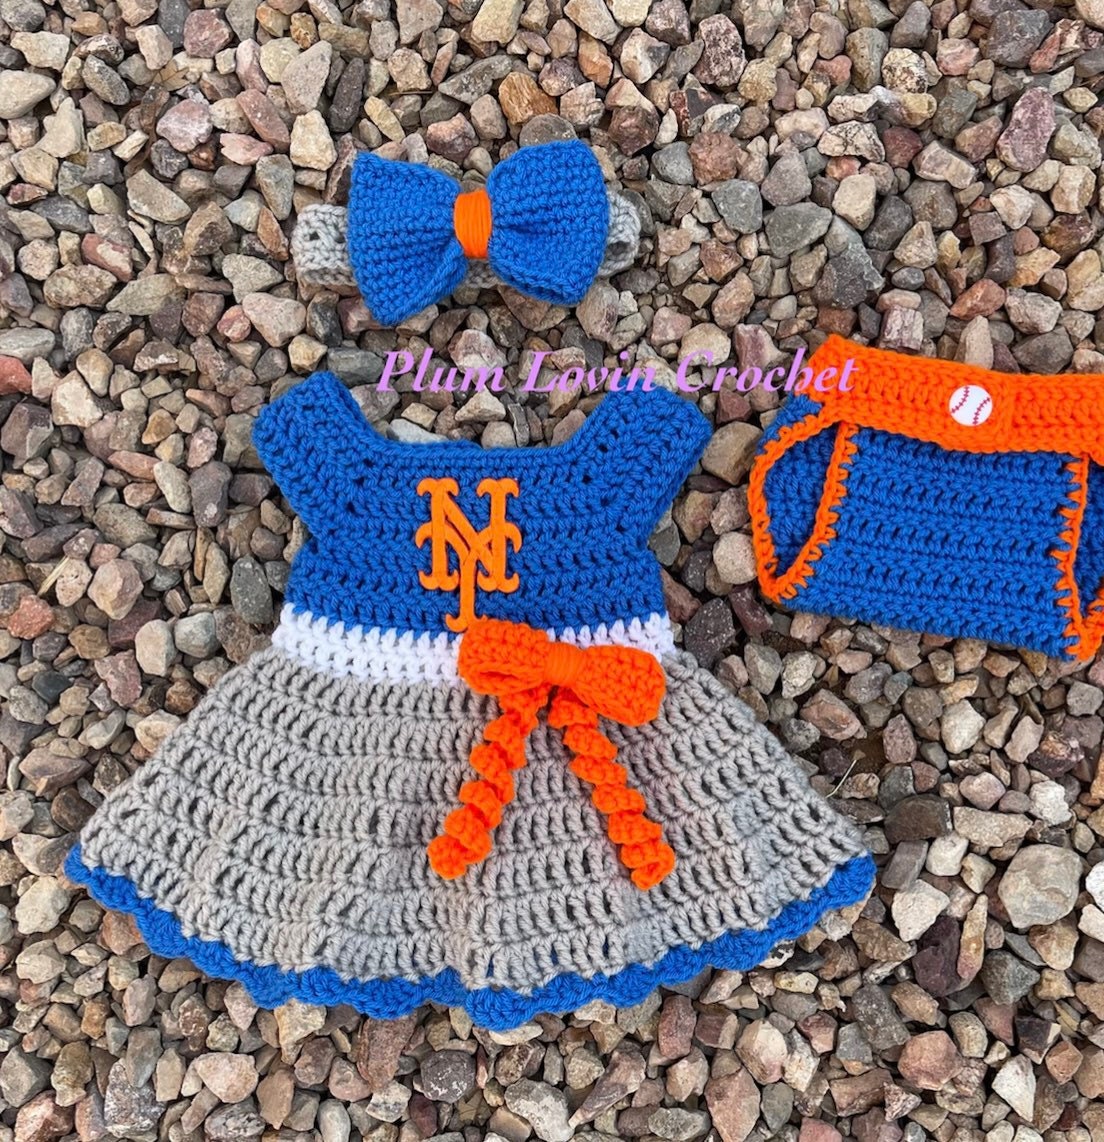 Mets Baby Mets Baby Outfit Mets Baby Skirt Baseball Baby 